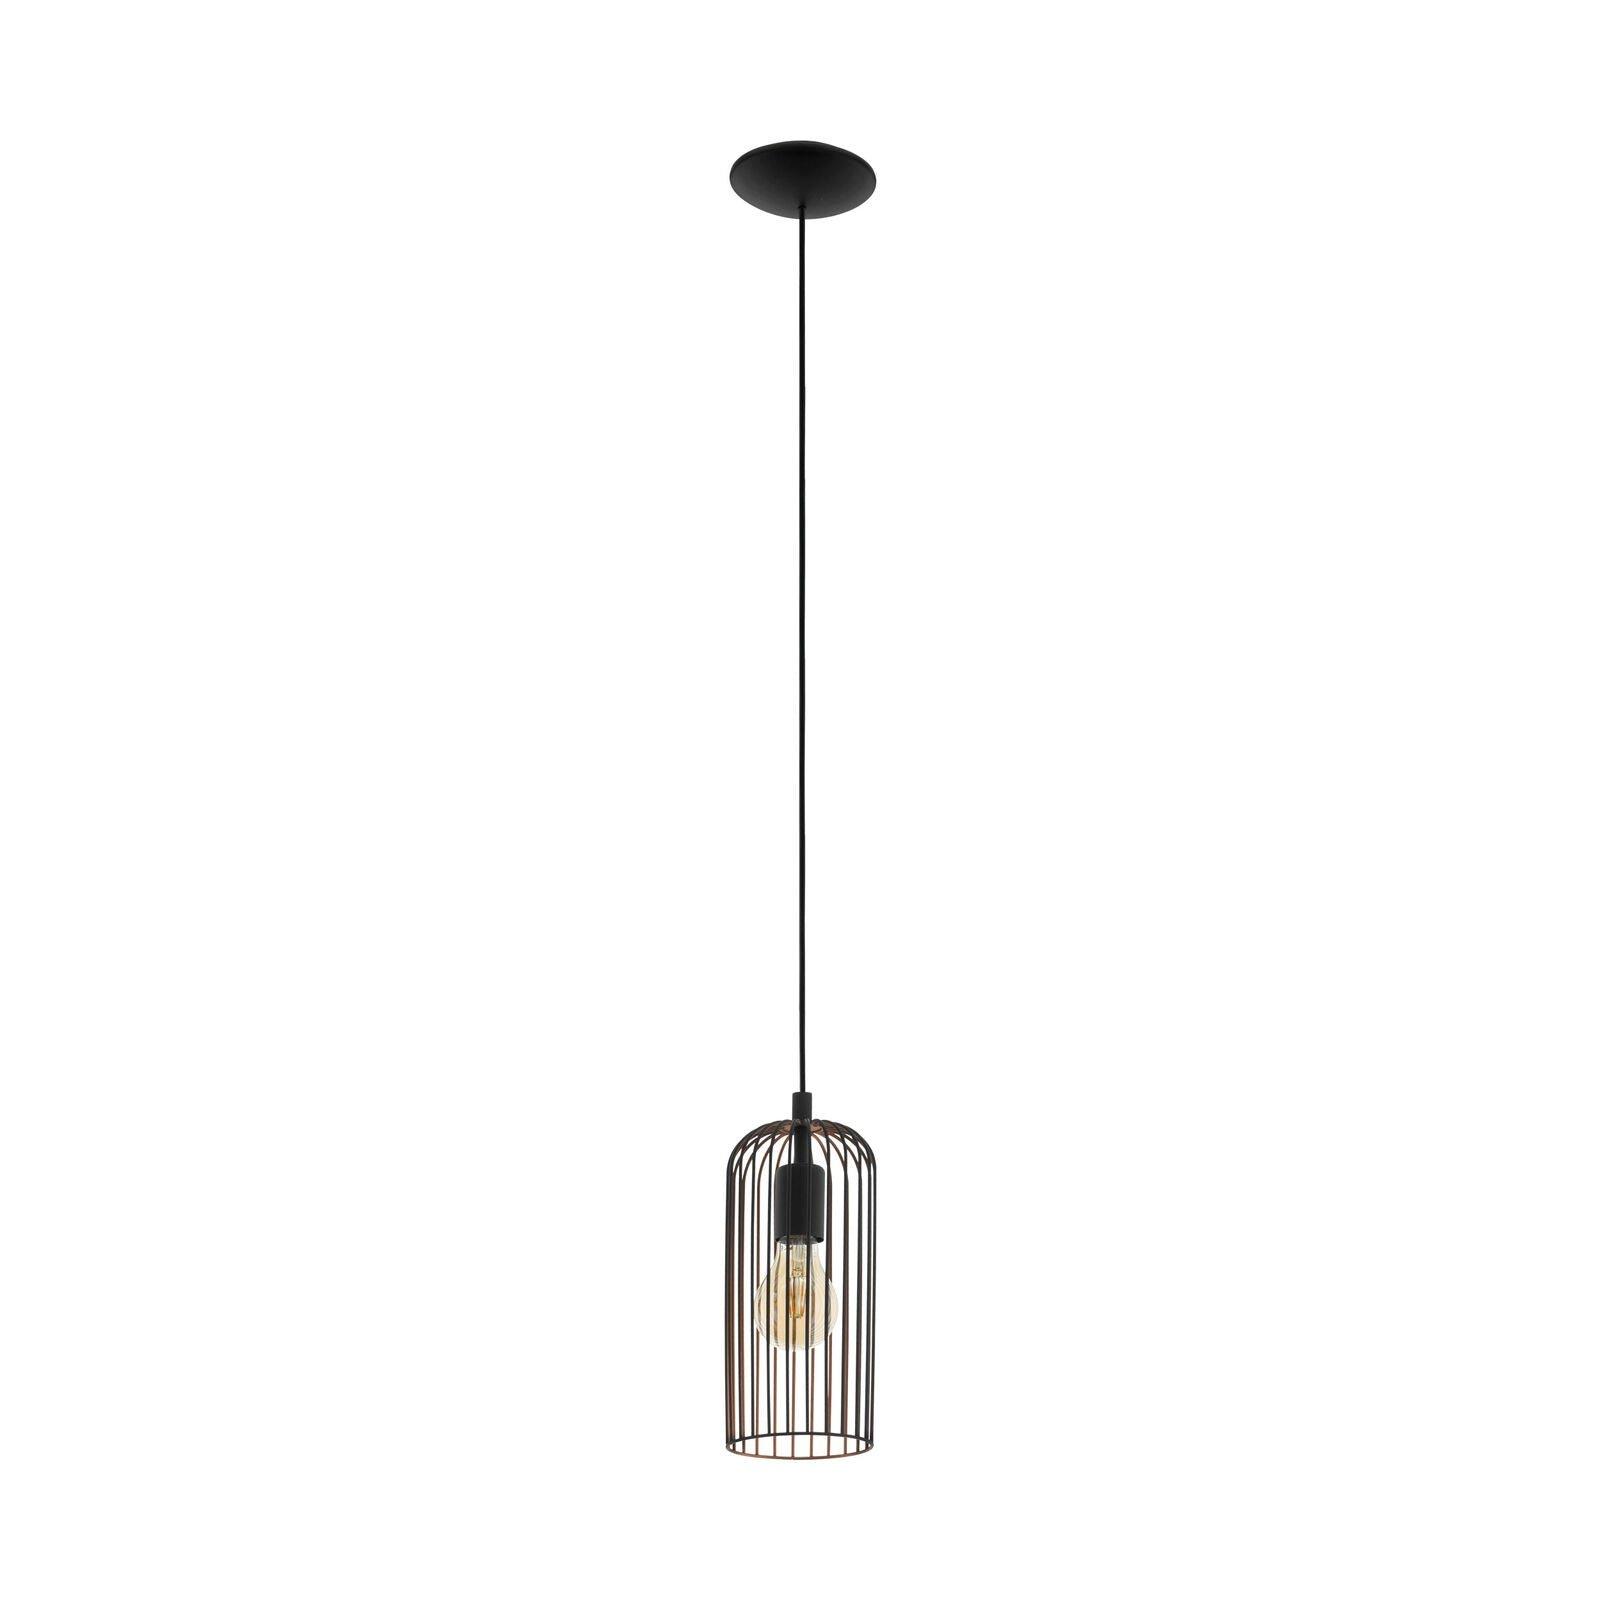 Hanging Ceiling Pendant Light Black & Copper Cage Shade 1 x 60W E27 Bulb